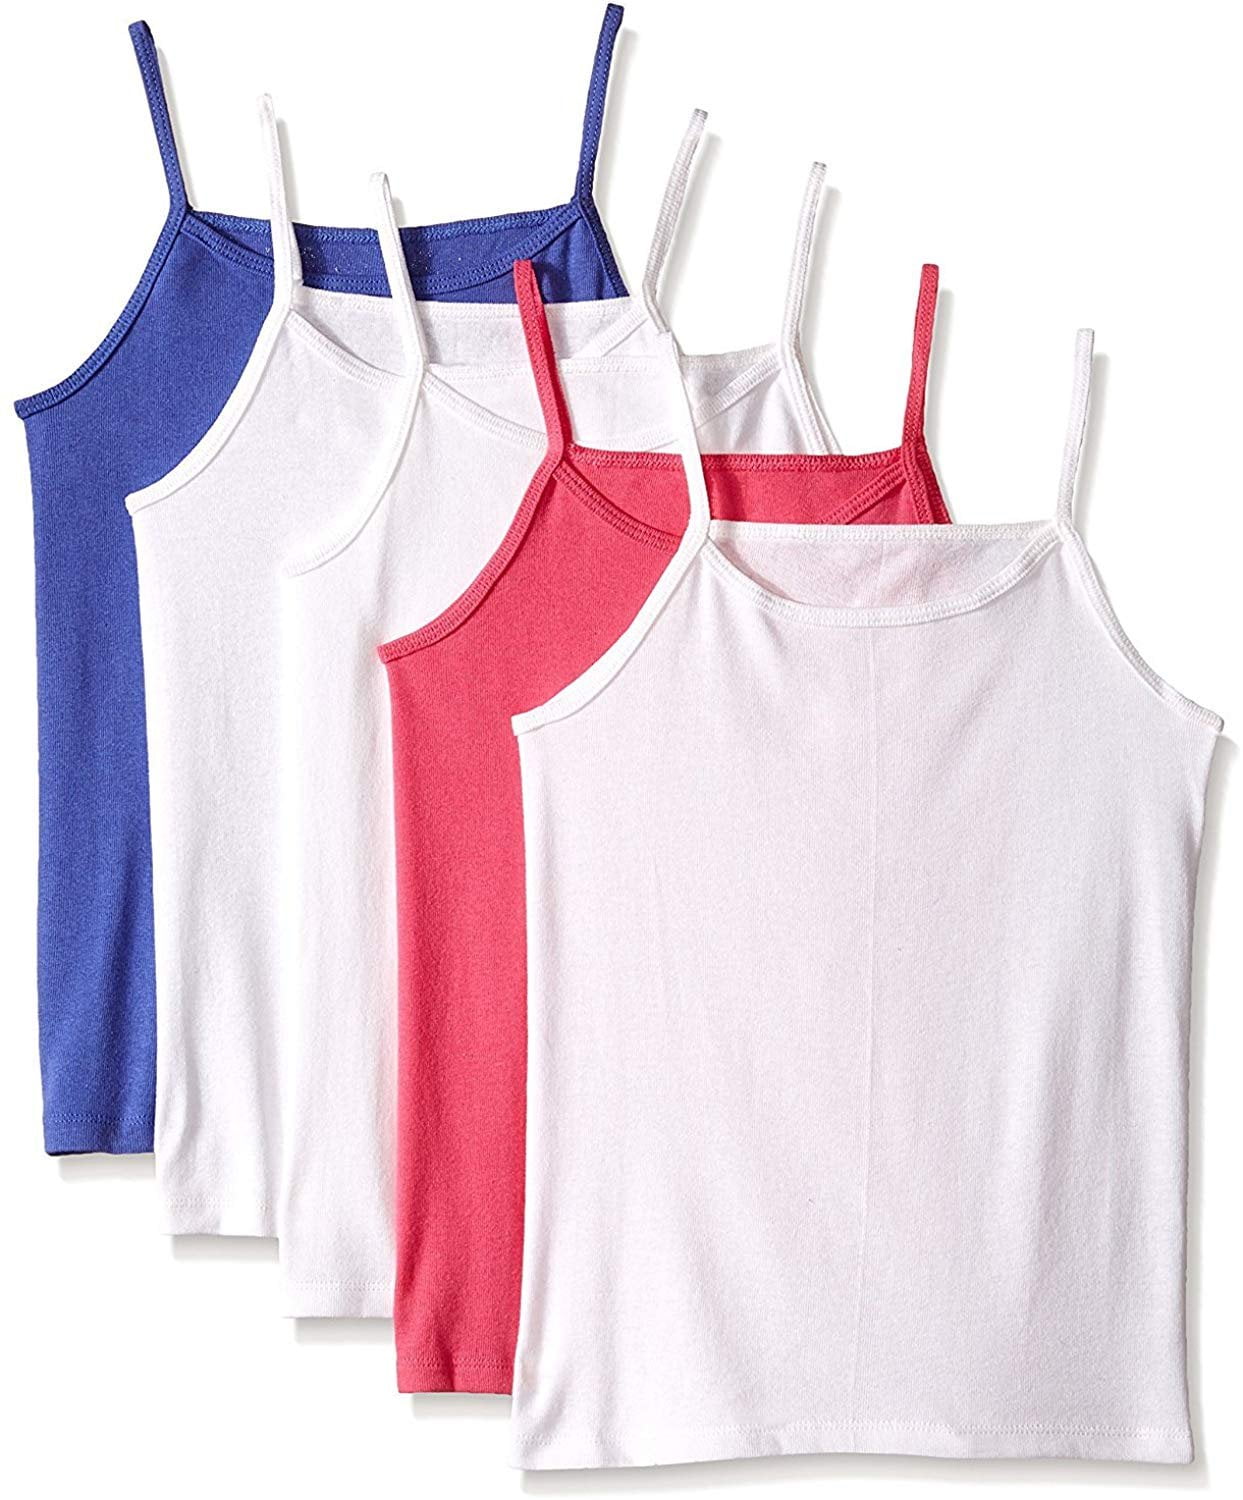 Fruit of the Loom Girls' Undershirts, Spin Cami Tank Tops, 10 Pack 